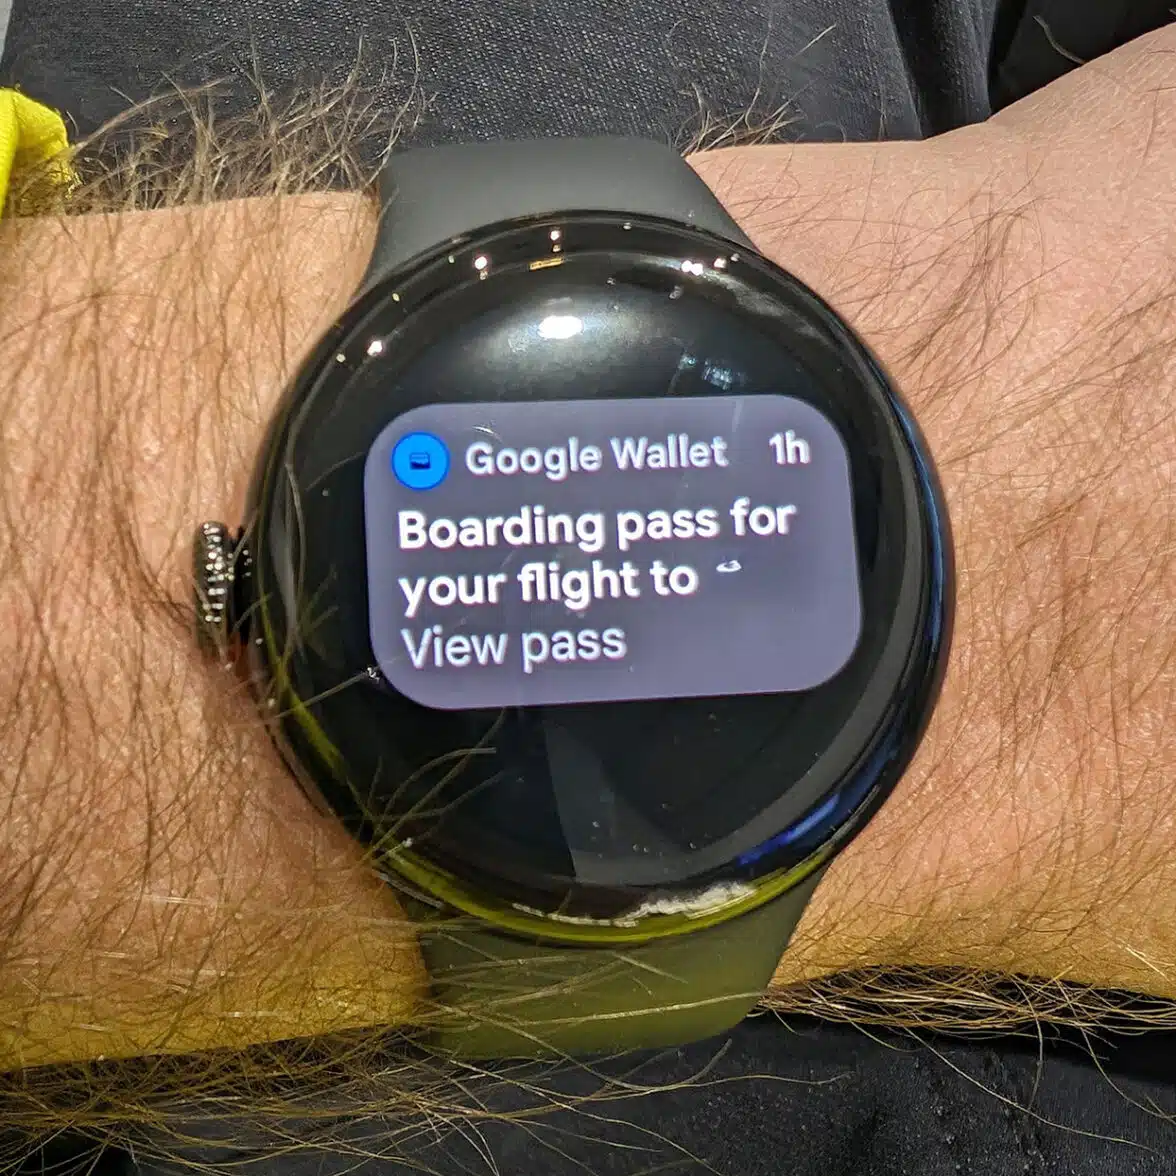 Google Wallet offering to display an airline boarding pass on a Google Pixel Watch 2. Image by u/Fuel13.